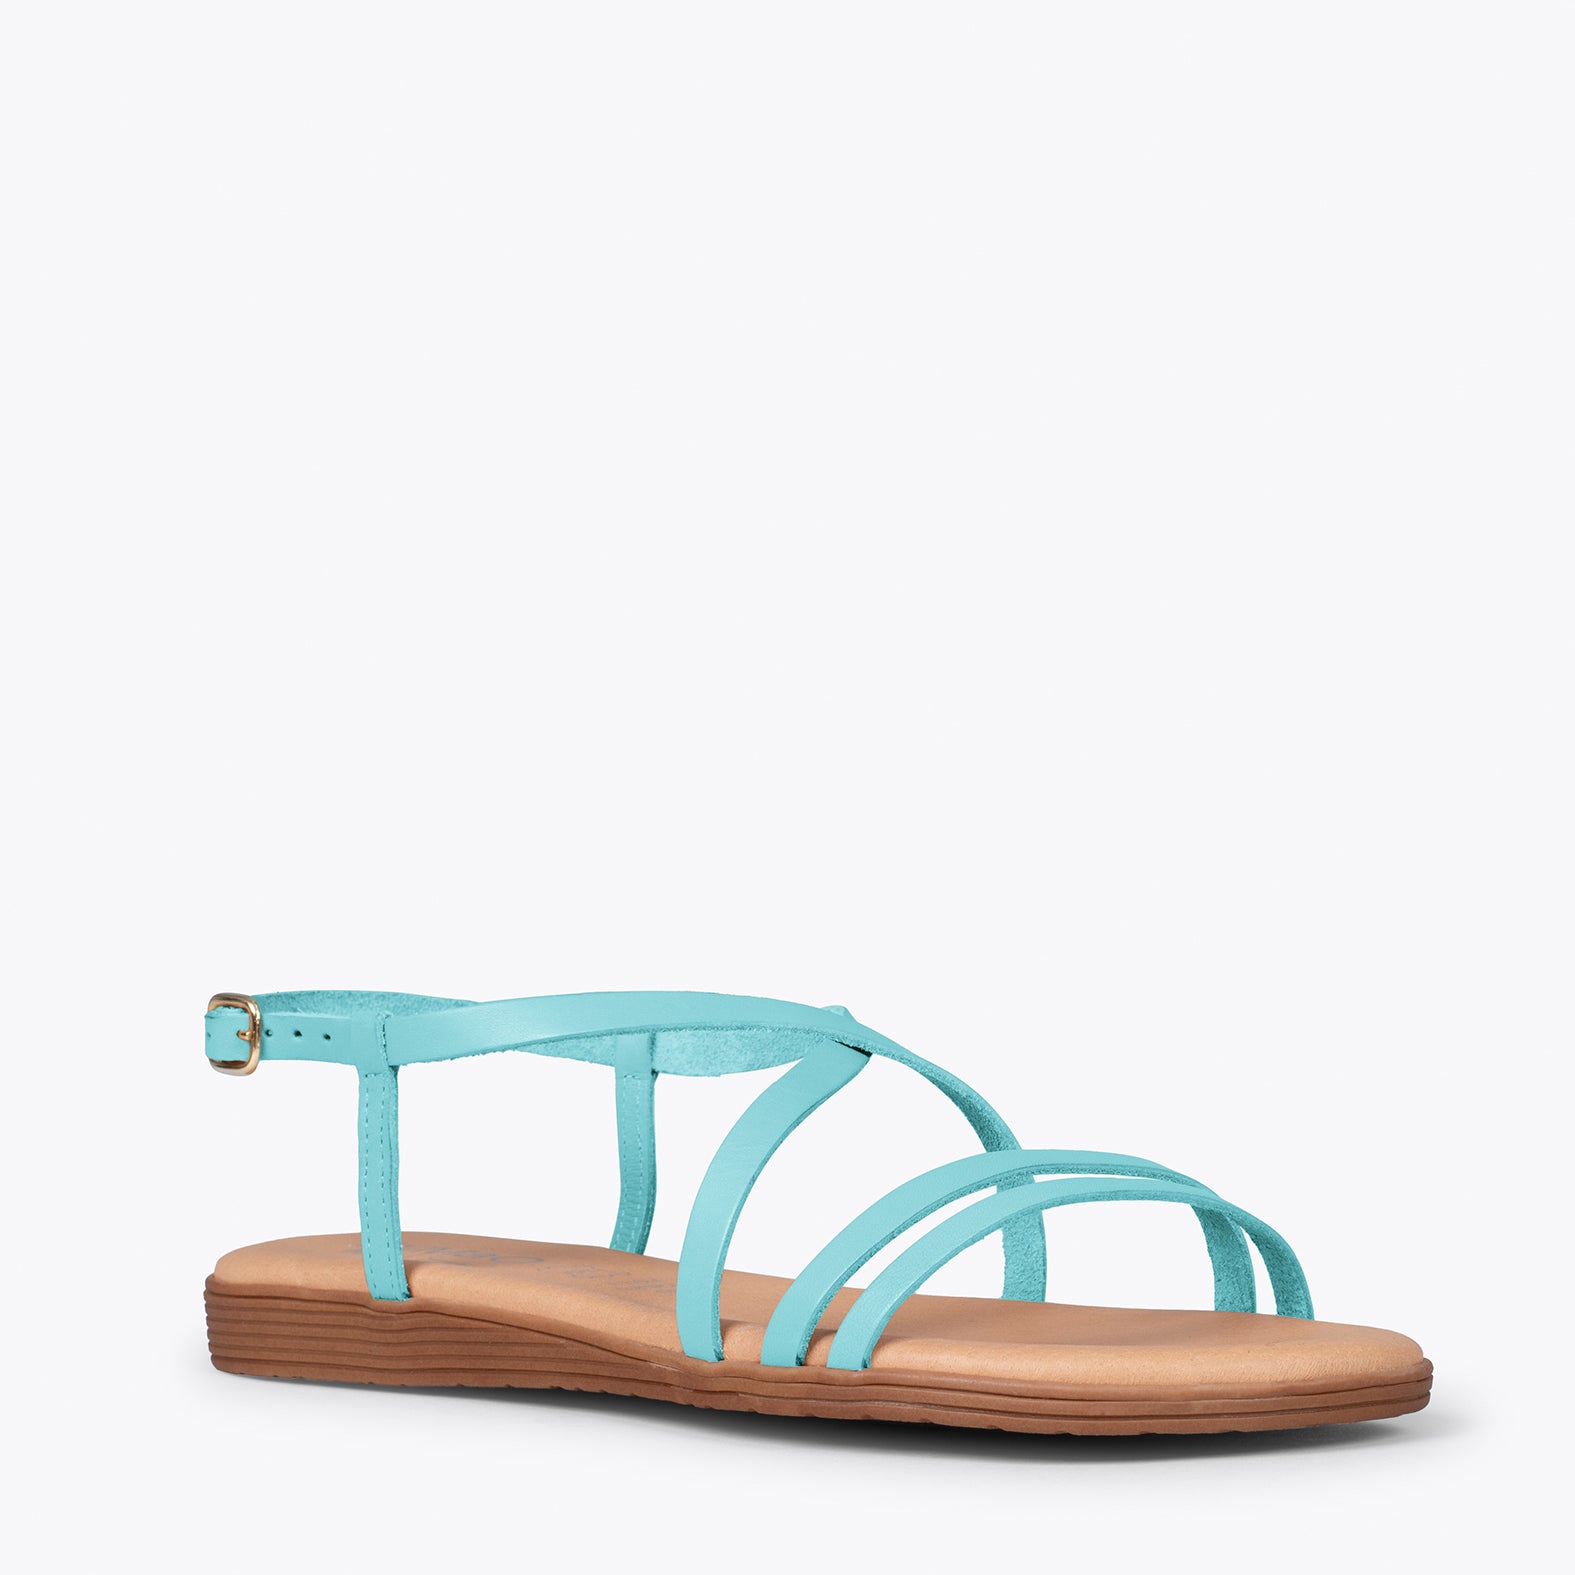 RODES - BLUE flat sandals with straps